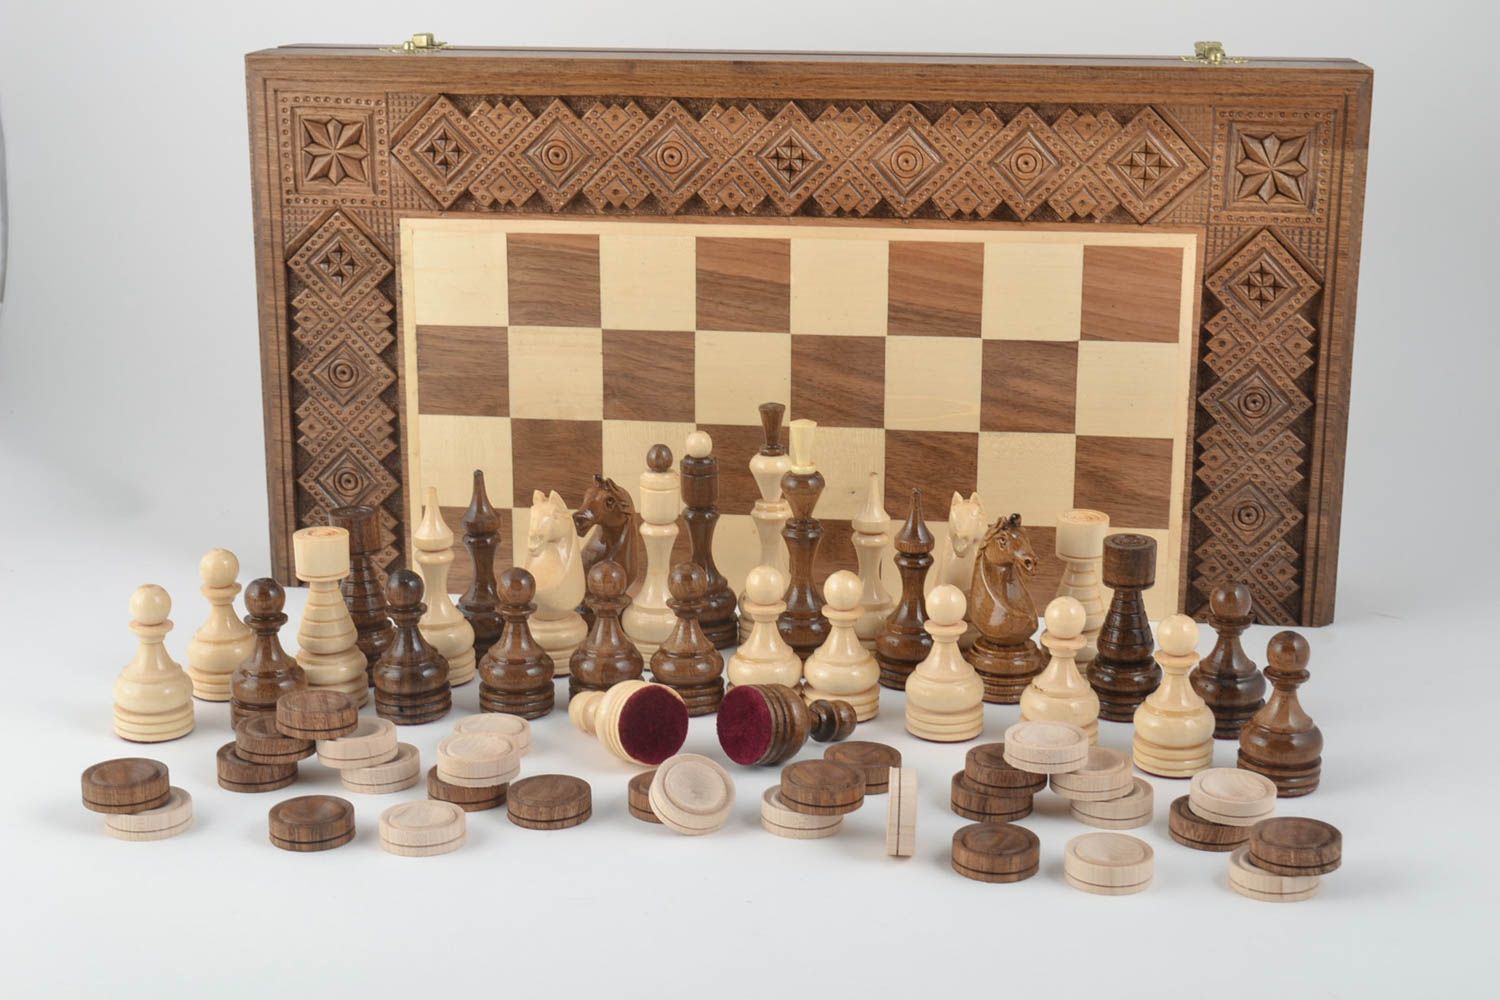 Unusual handmade wooden chessboard chess pieces board games birthday gift ideas photo 1